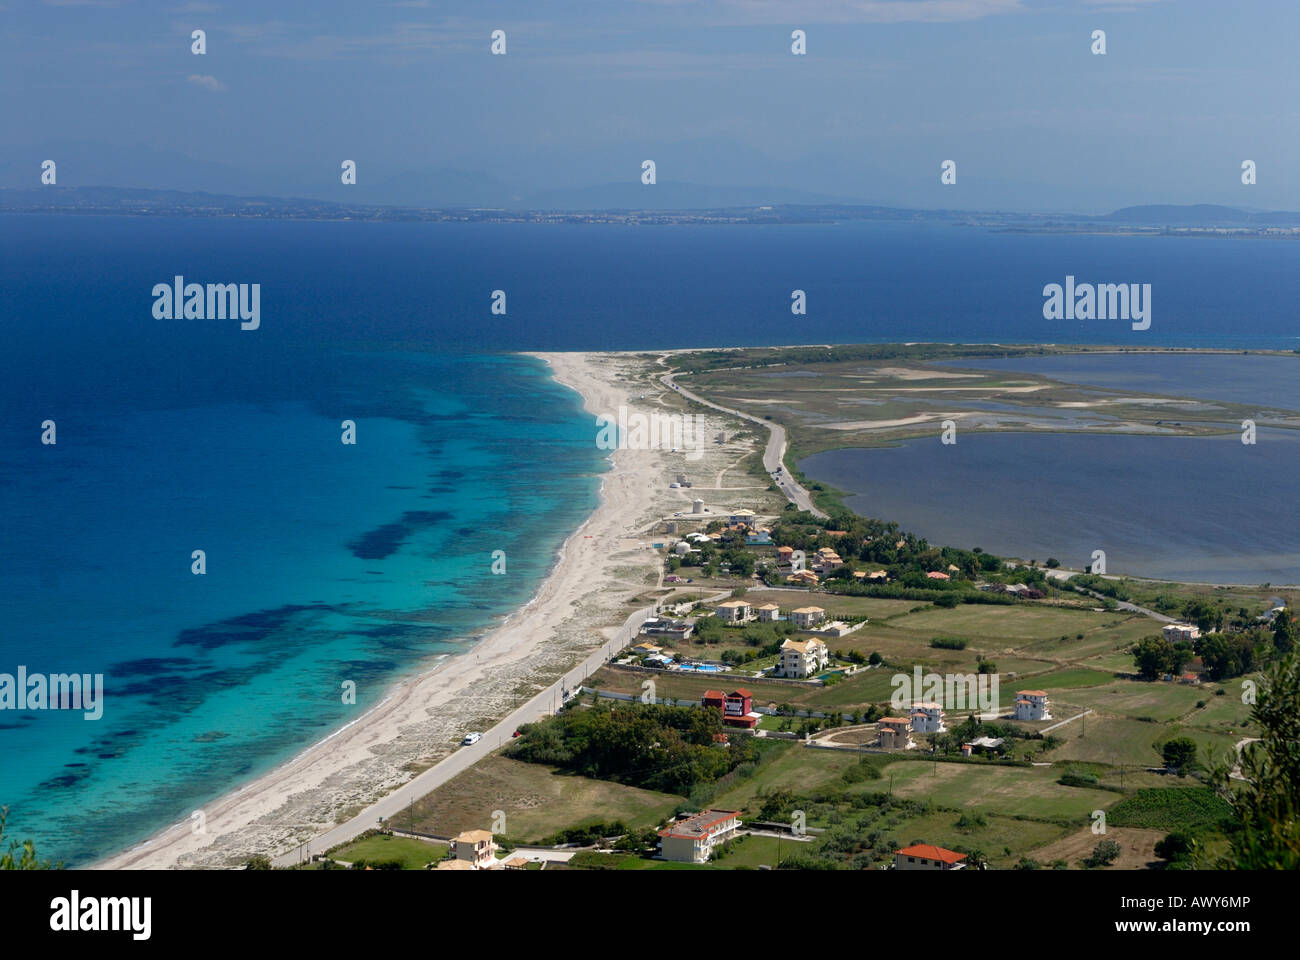 Mili Beach High Resolution Stock Photography and Images - Alamy